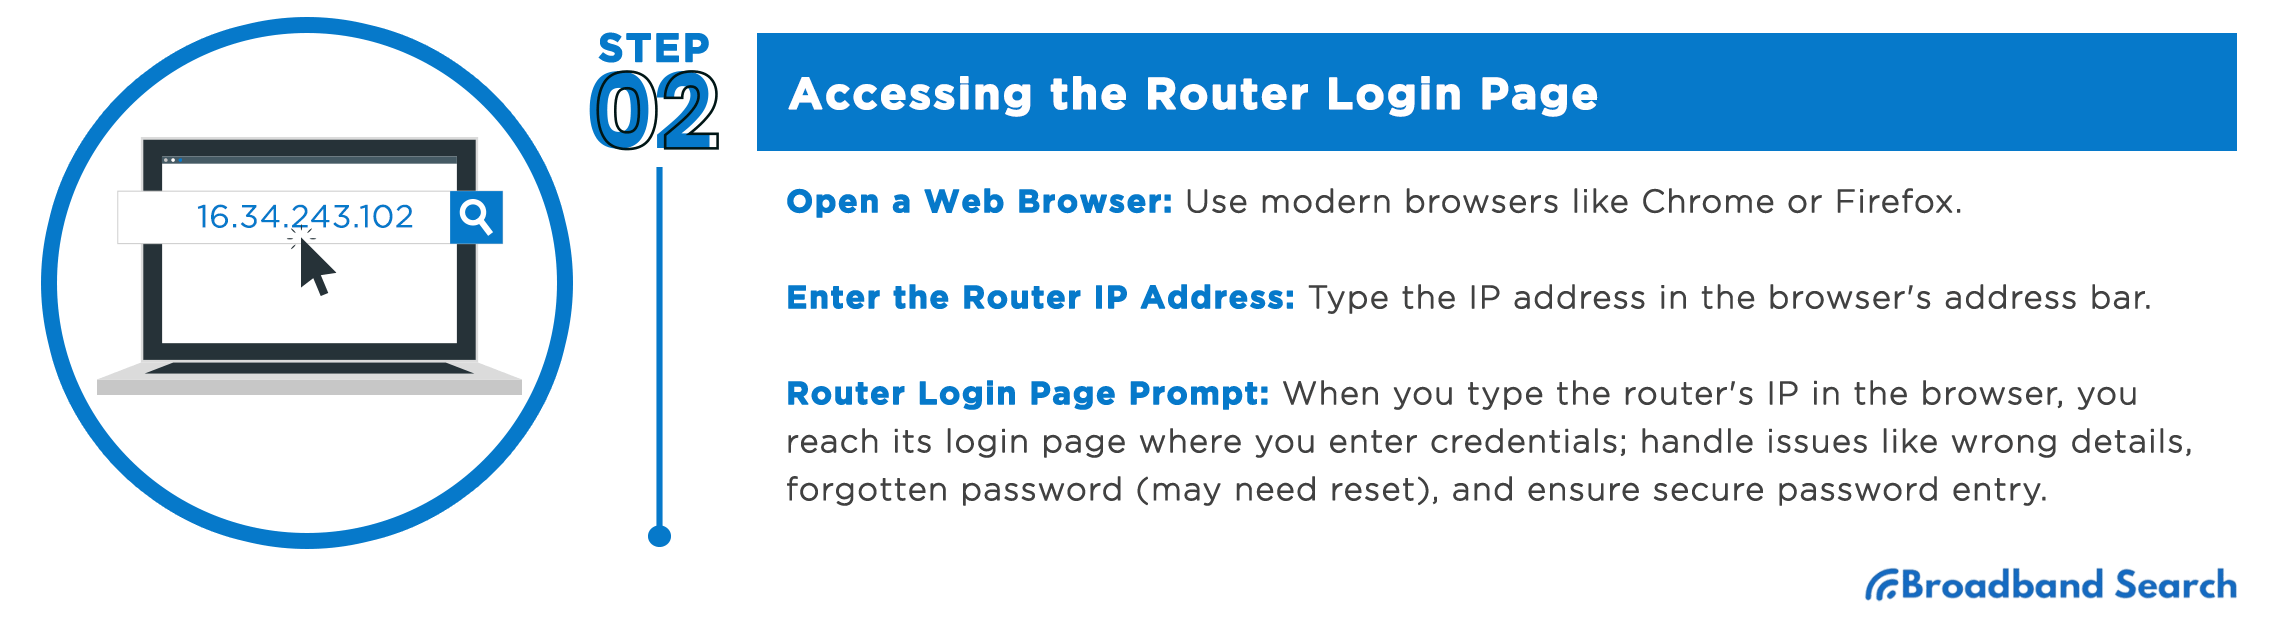 Instructions on how to access the router login page